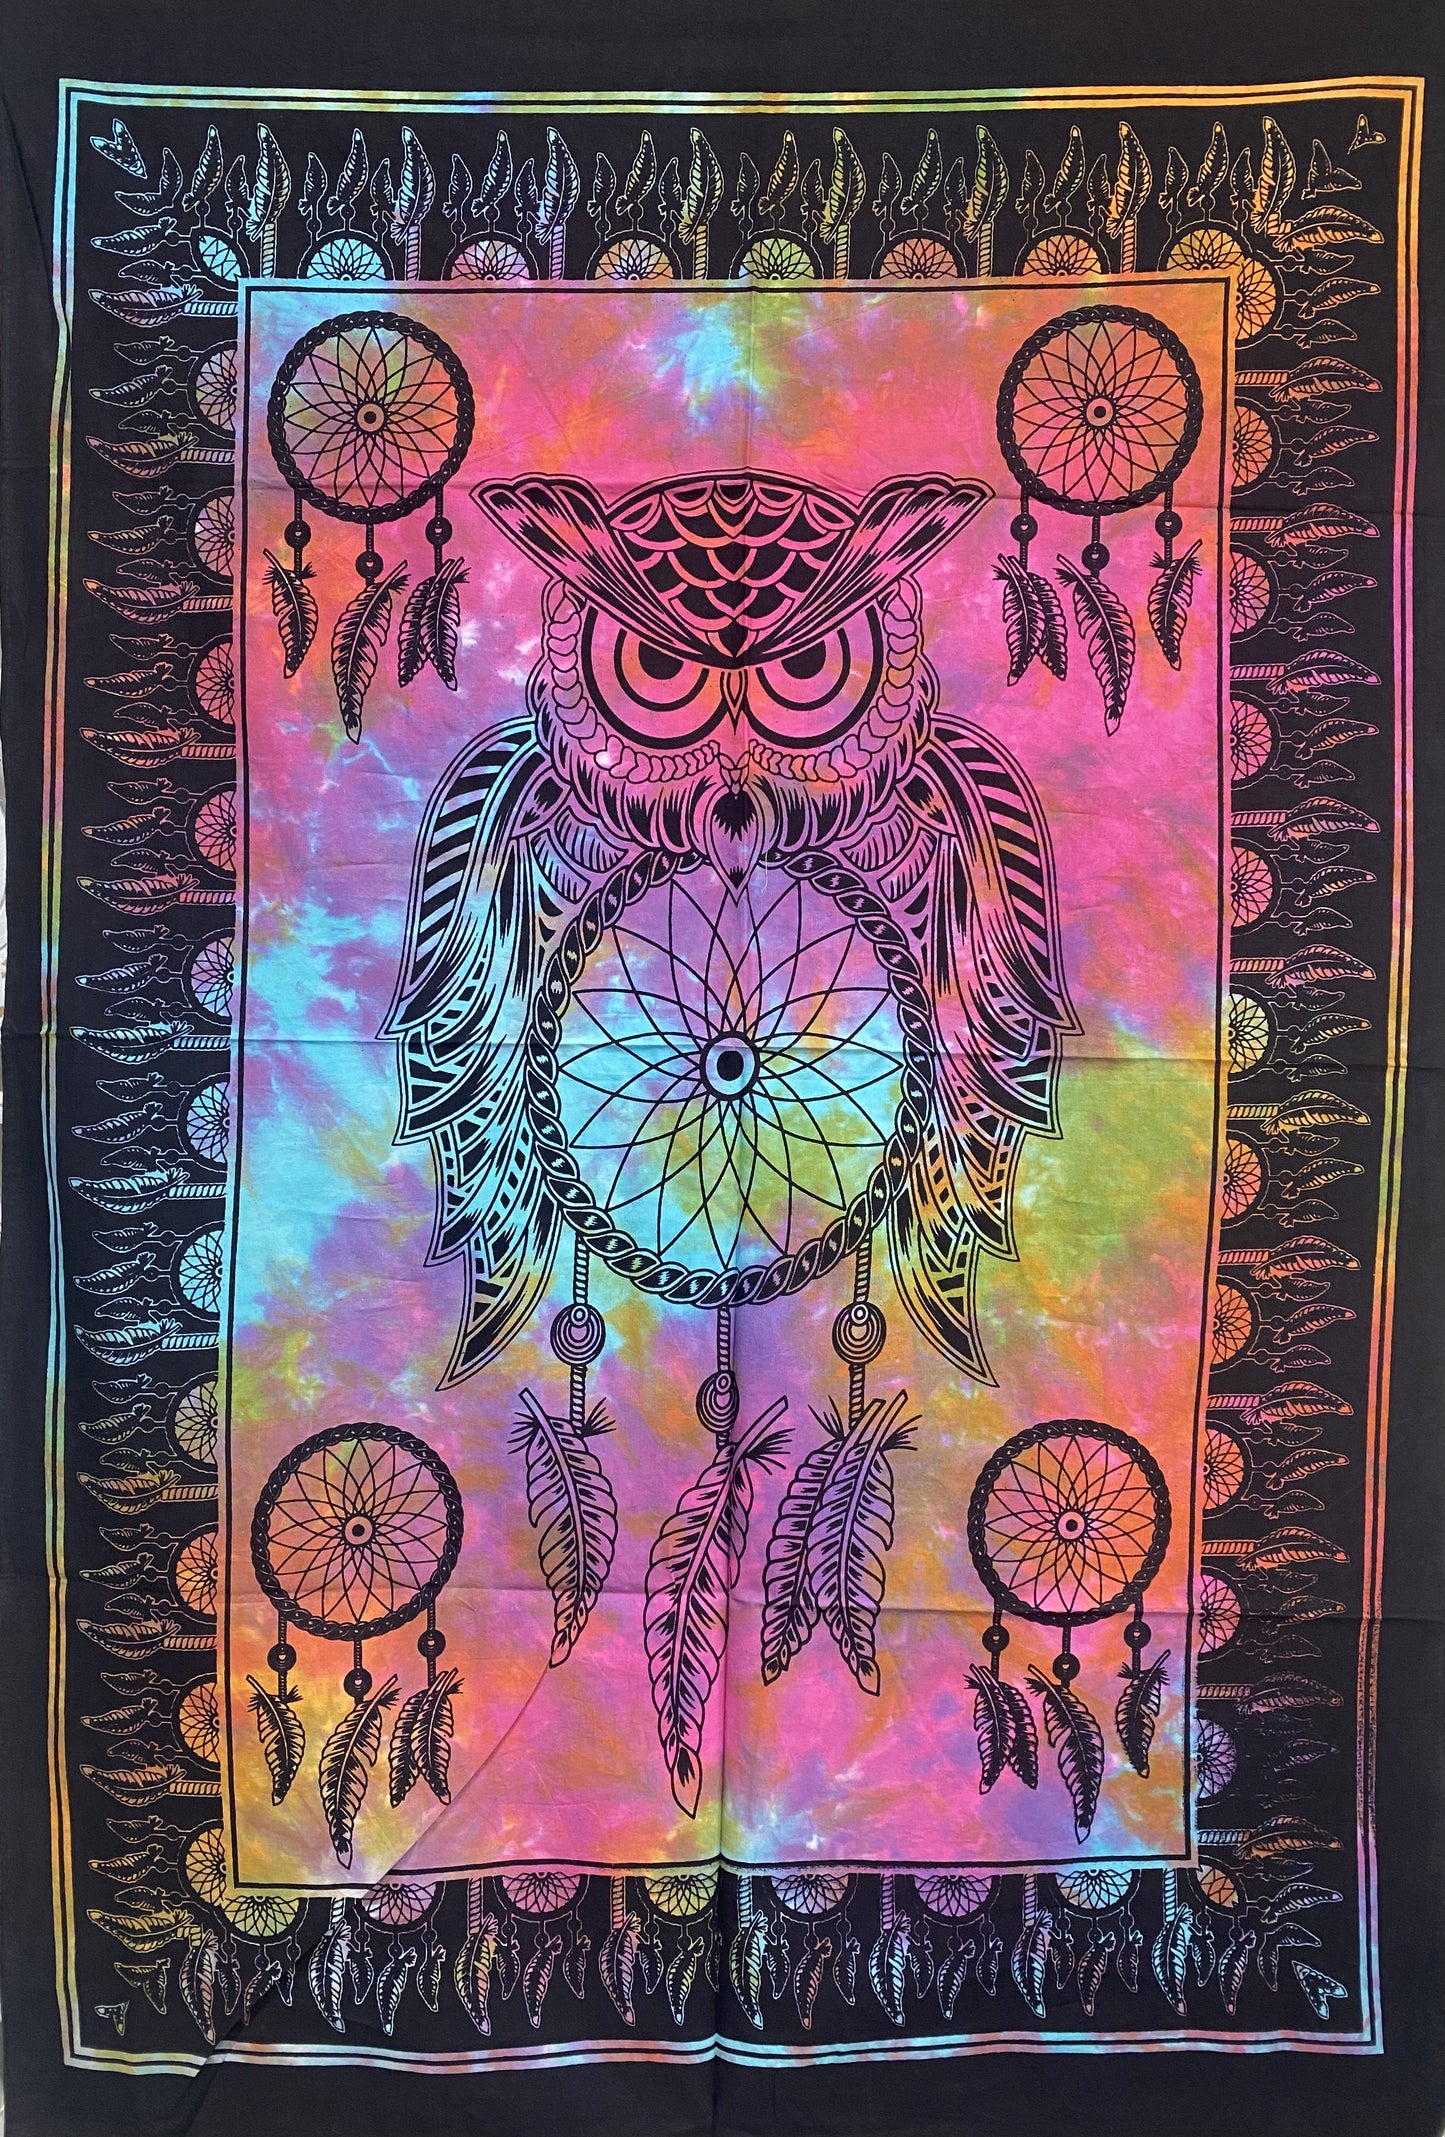 Hand printed Fabric Posters Owl Dreamcather Tapestries Wall Hangings